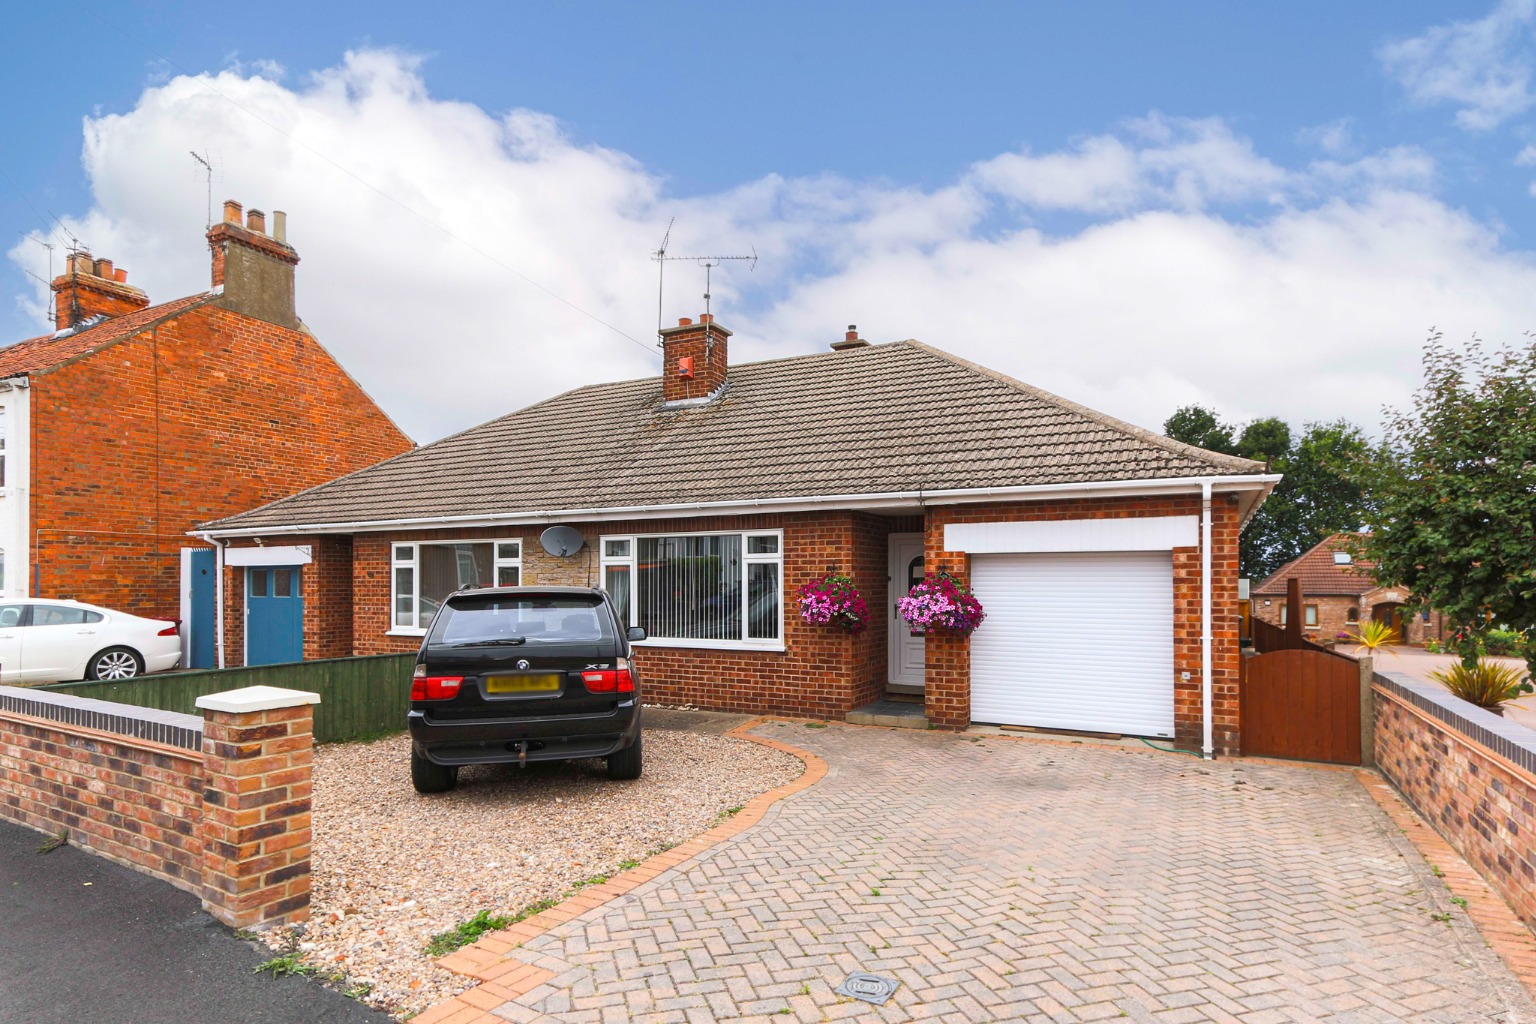 3 bed semi-detached bungalow for sale in West Acridge, Barton upon Humber - Property Image 1